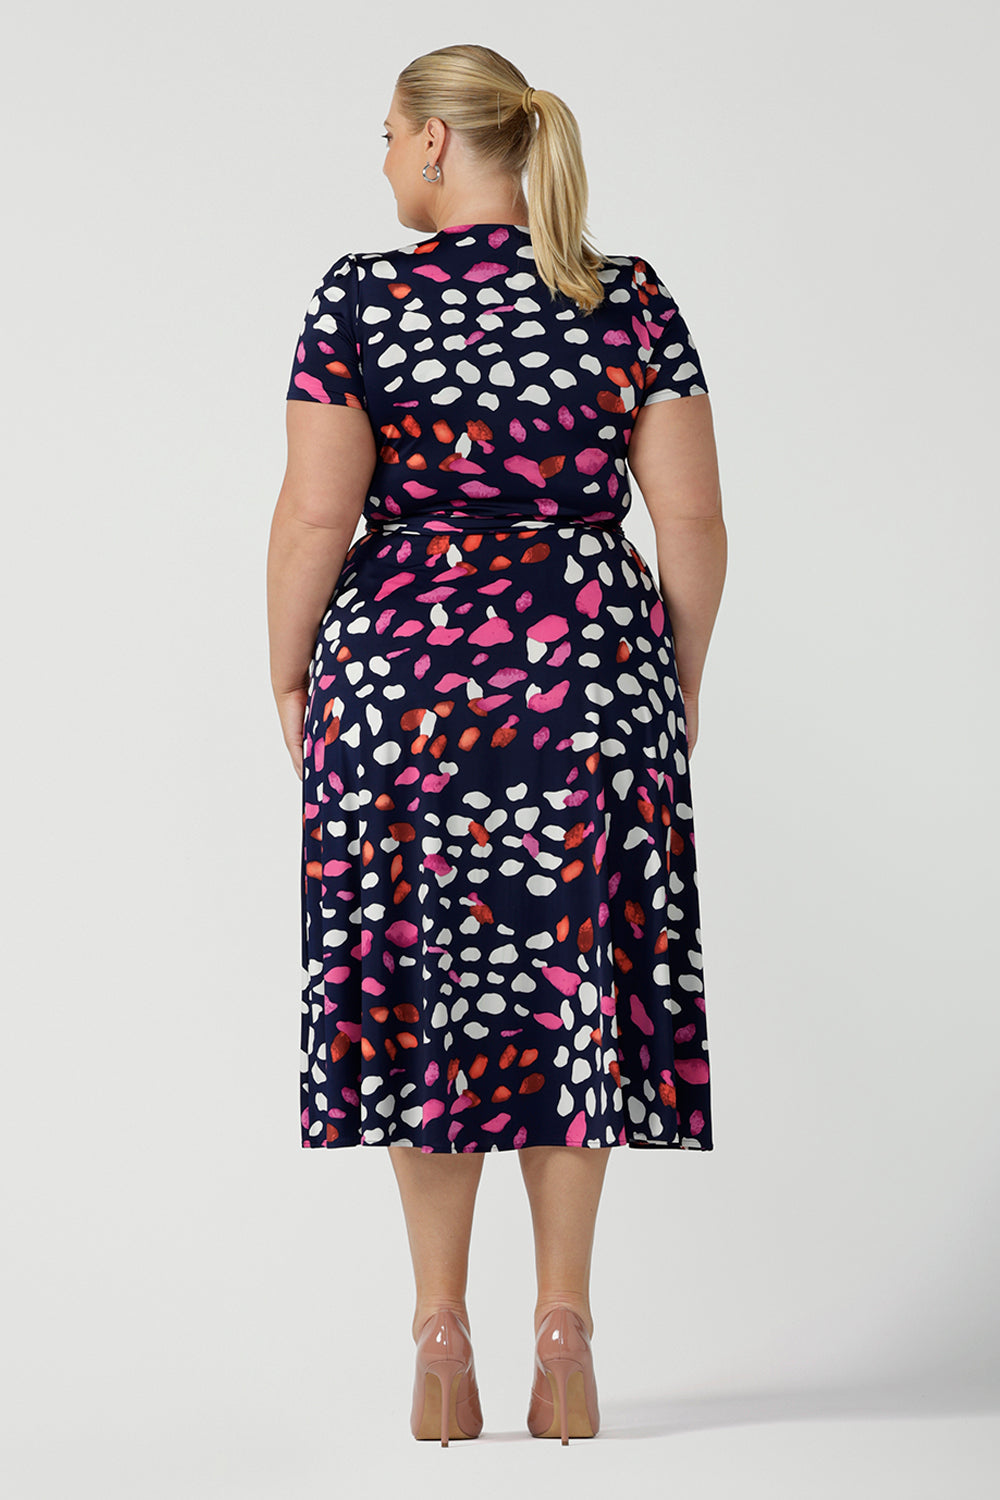 Back view of a curvy, size 18 woman wearing an abstract jersey print, wrap dress with short sleeves. A great dress for summer casual wear, or for travel. Shop made in Australia dresses in petite to plus sizes online at Australian fashion brand, Leina & Fleur.